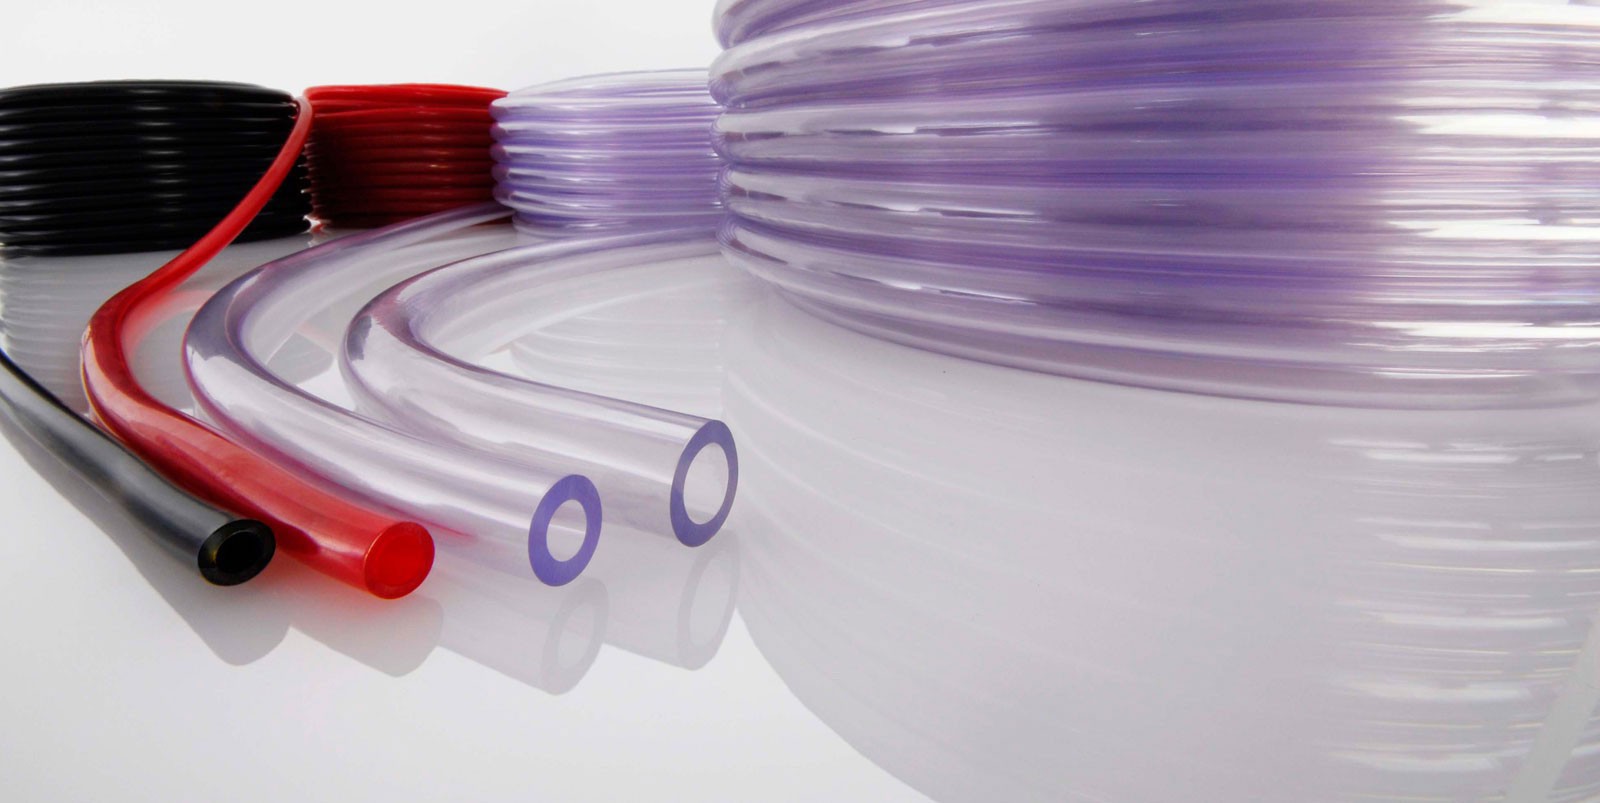 Low-Density Polythene (LDPE) Tubing, What Is It & What Can It Be Used For?